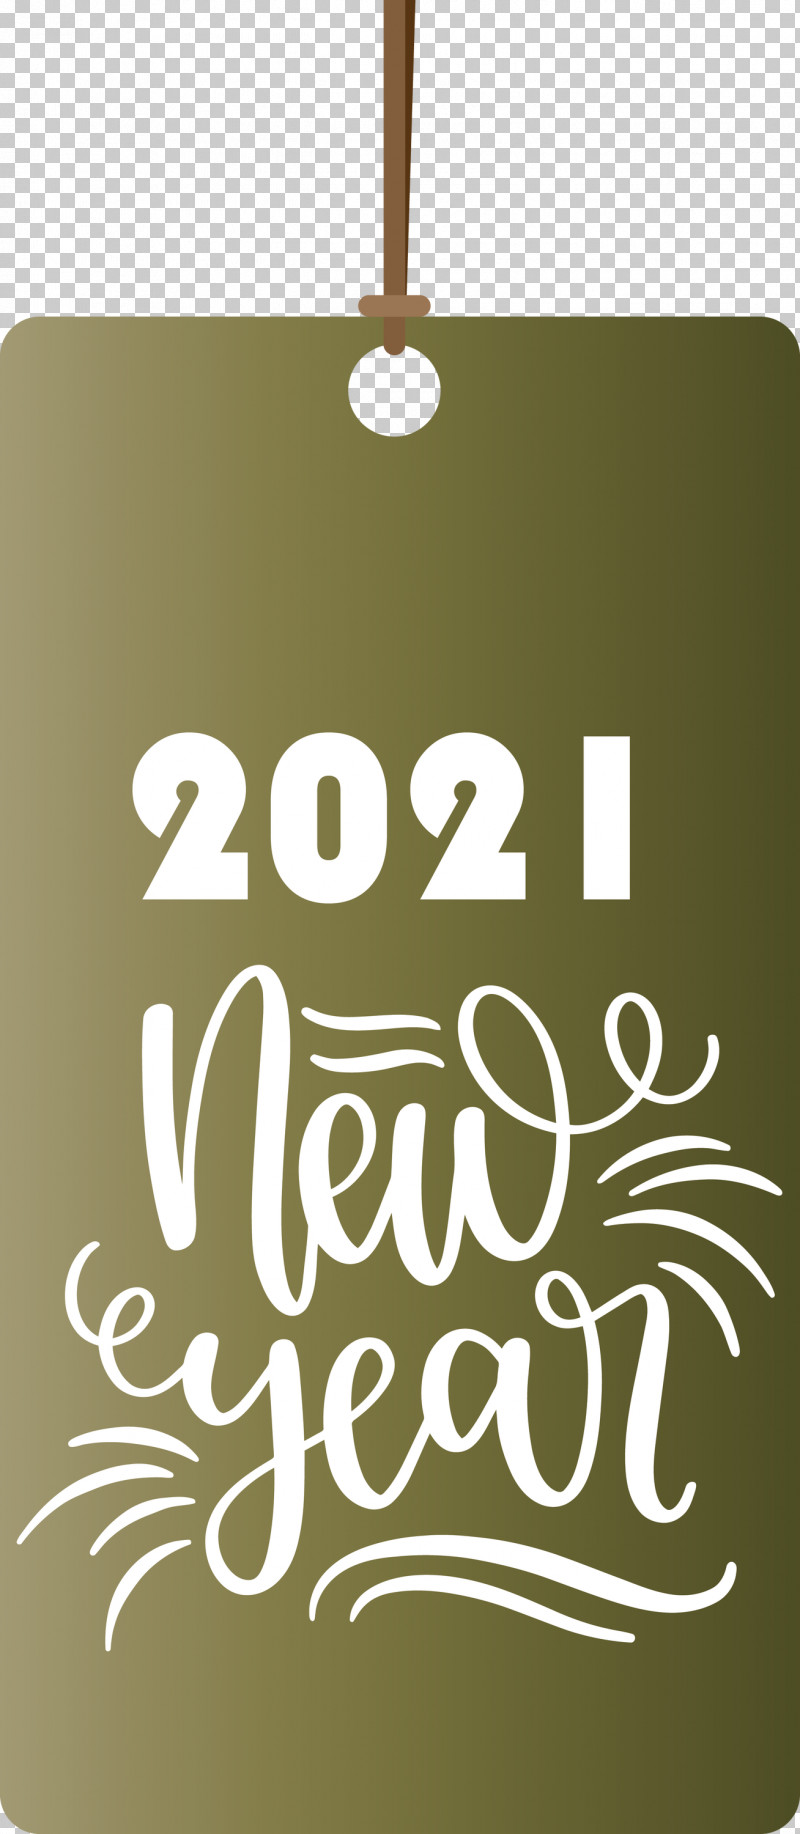 2021 Happy New Year 2021 Happy New Year Tag 2021 New Year PNG, Clipart, 2021 Happy New Year, 2021 Happy New Year Tag, 2021 New Year, Calligraphy, M Free PNG Download